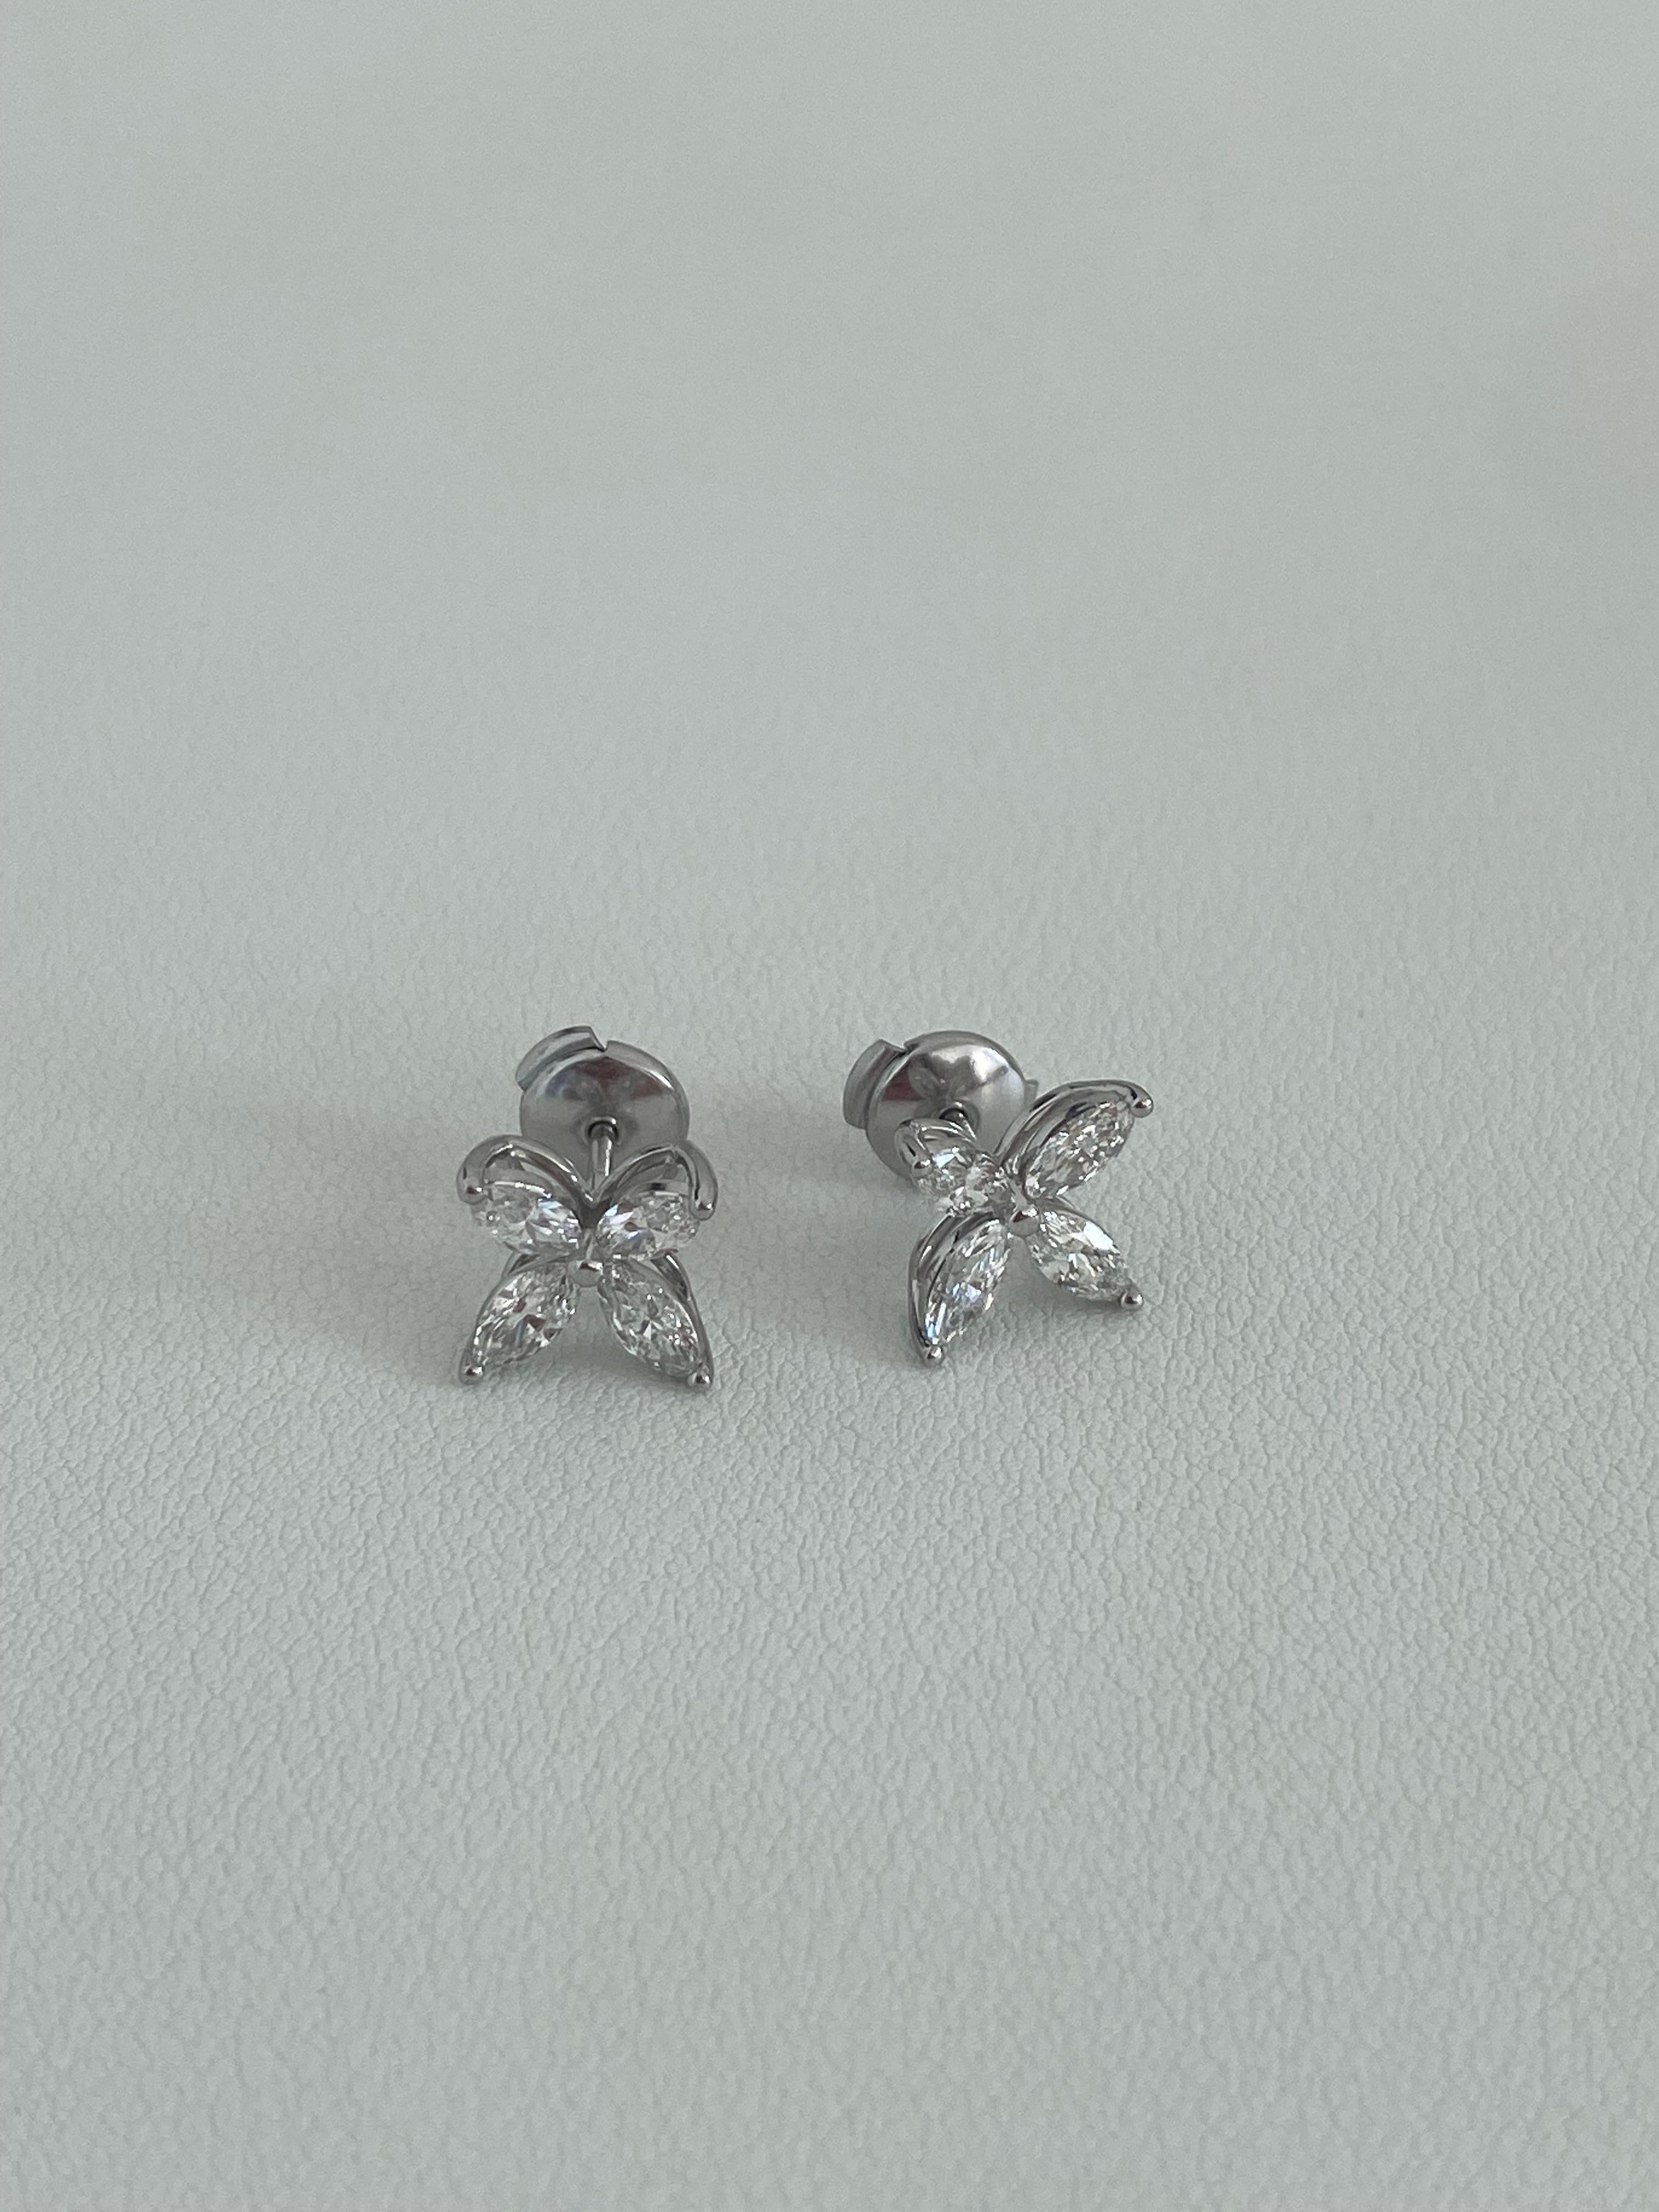 Tiffany Co Victoria mini platinum with diamonds studs earrings 
Carat weight 0.19 ctw 
Pt950
Condition : excellent , no defects , giftable condition 
Come within the paper blue box and pouch 
RETAIL VALUE $4,500
Thank you for stopping by, 
Golden